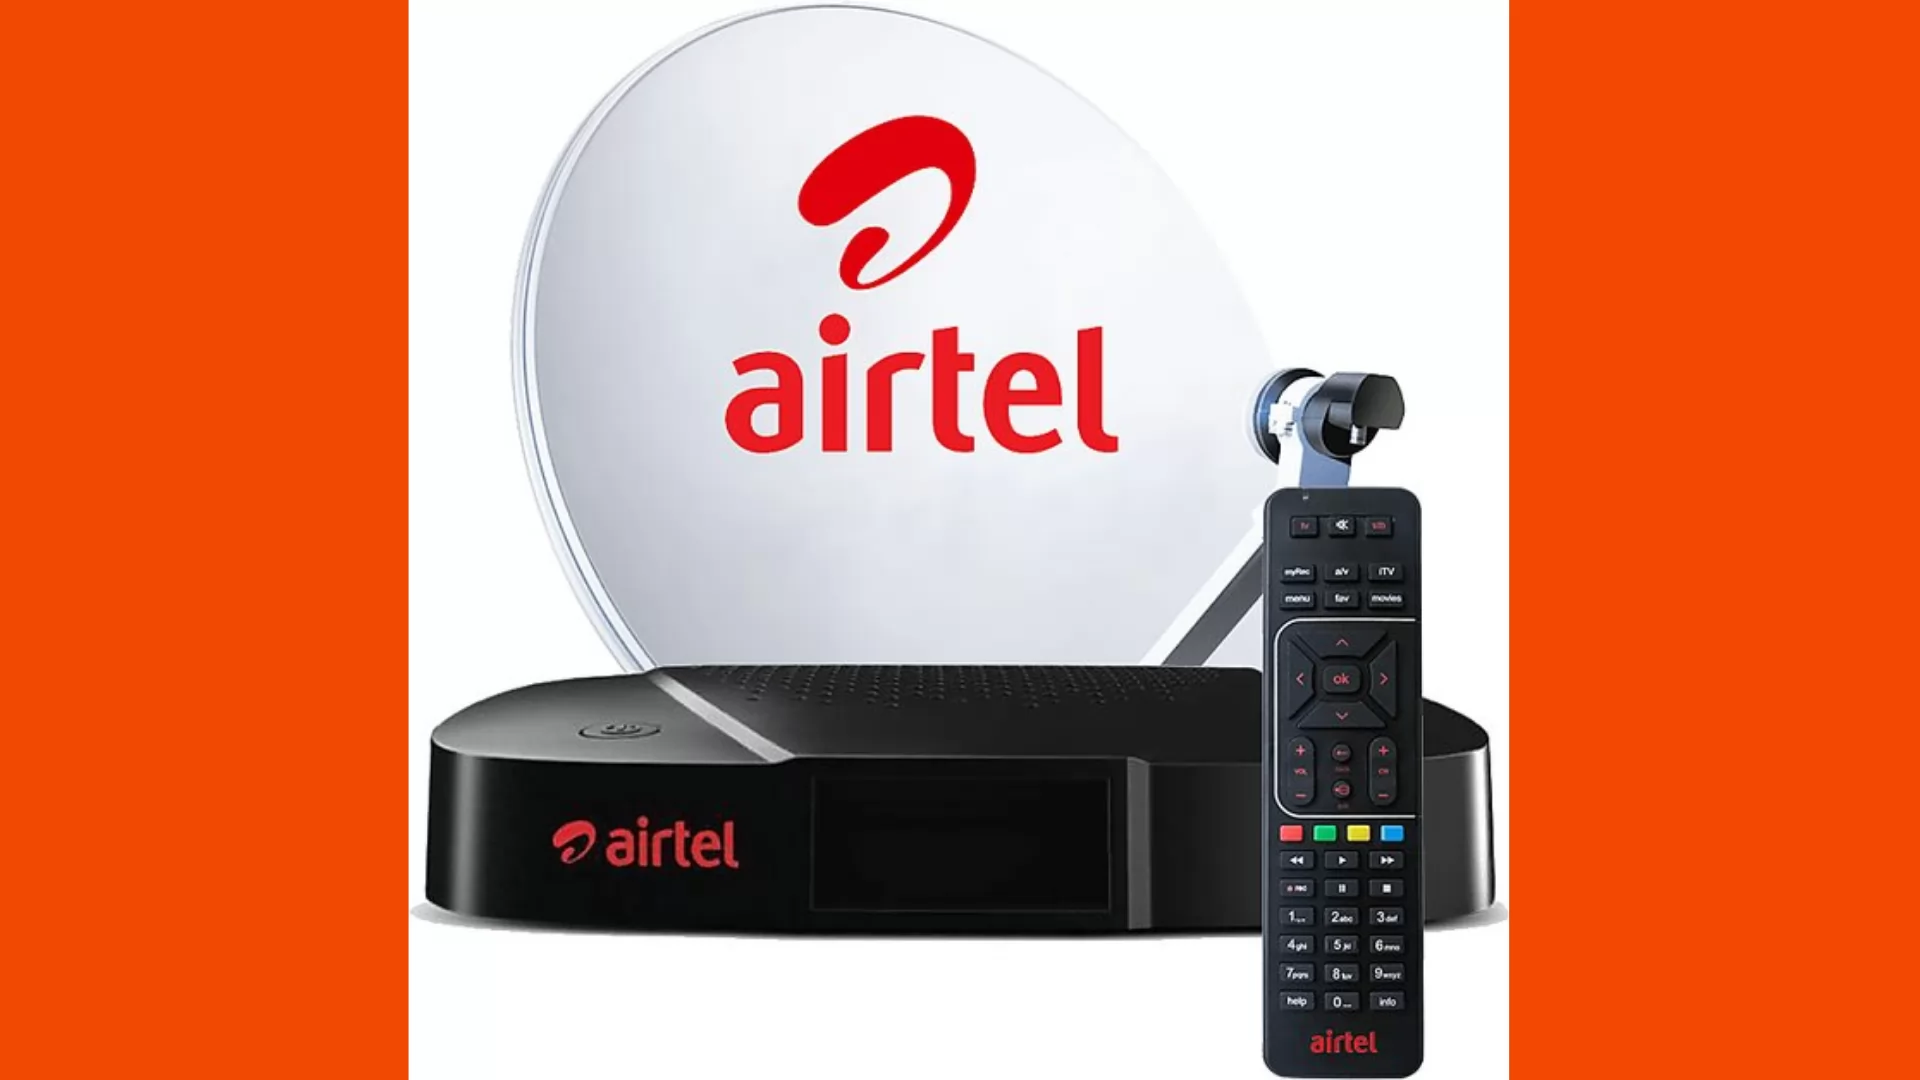 Airtel DTH My Plan 199 Channel List: Complete Channel List And Price